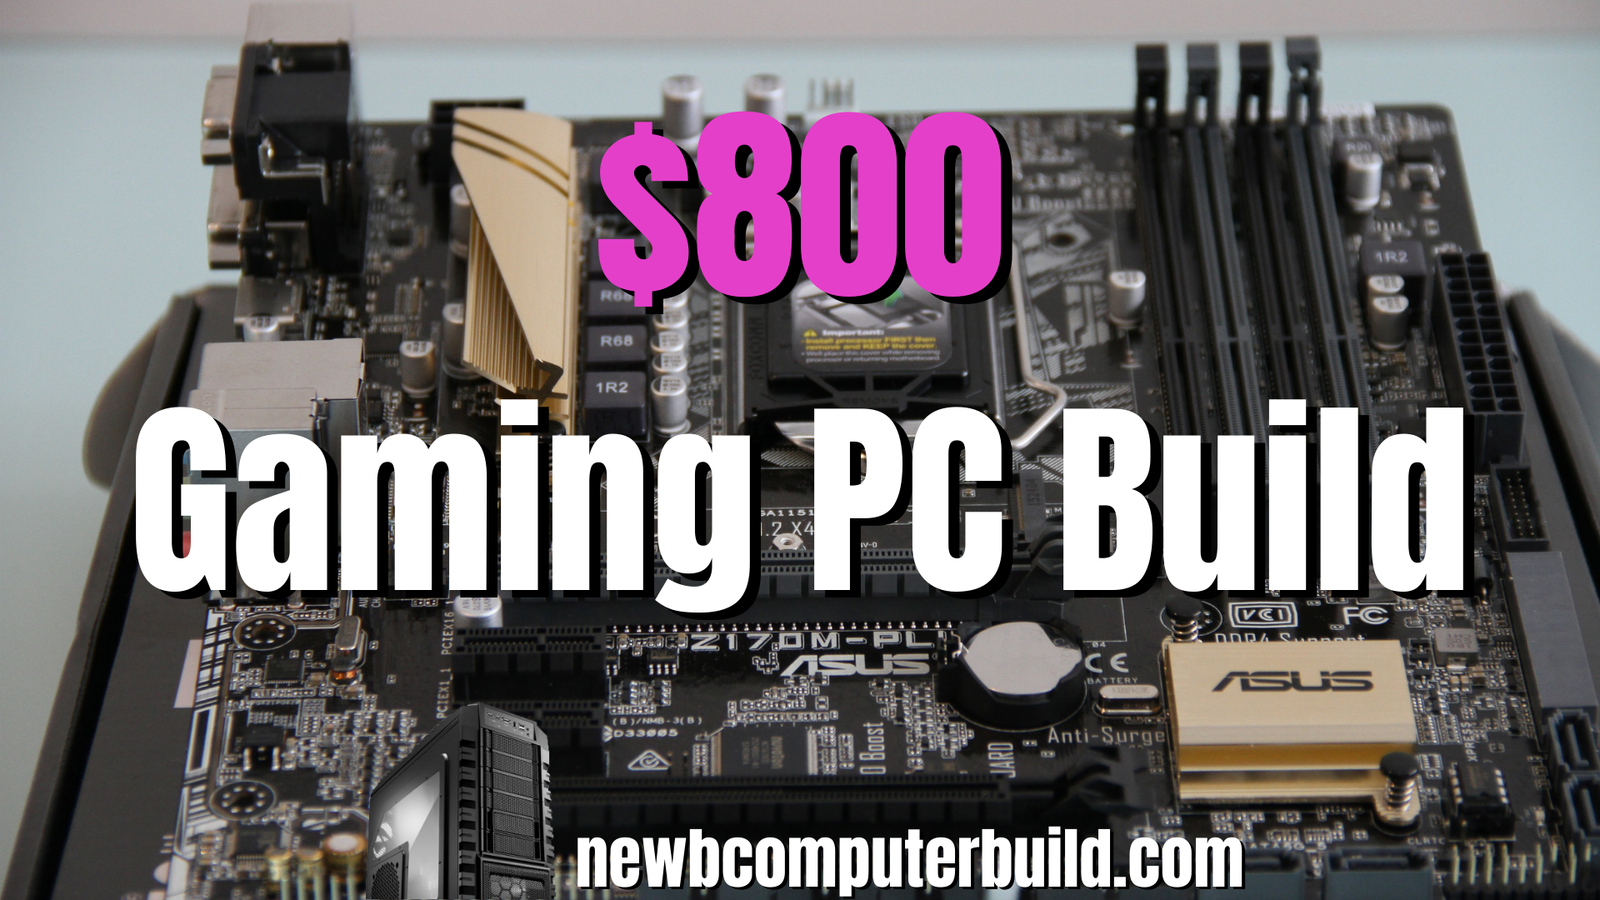 The Best $800 PC Build for 2022